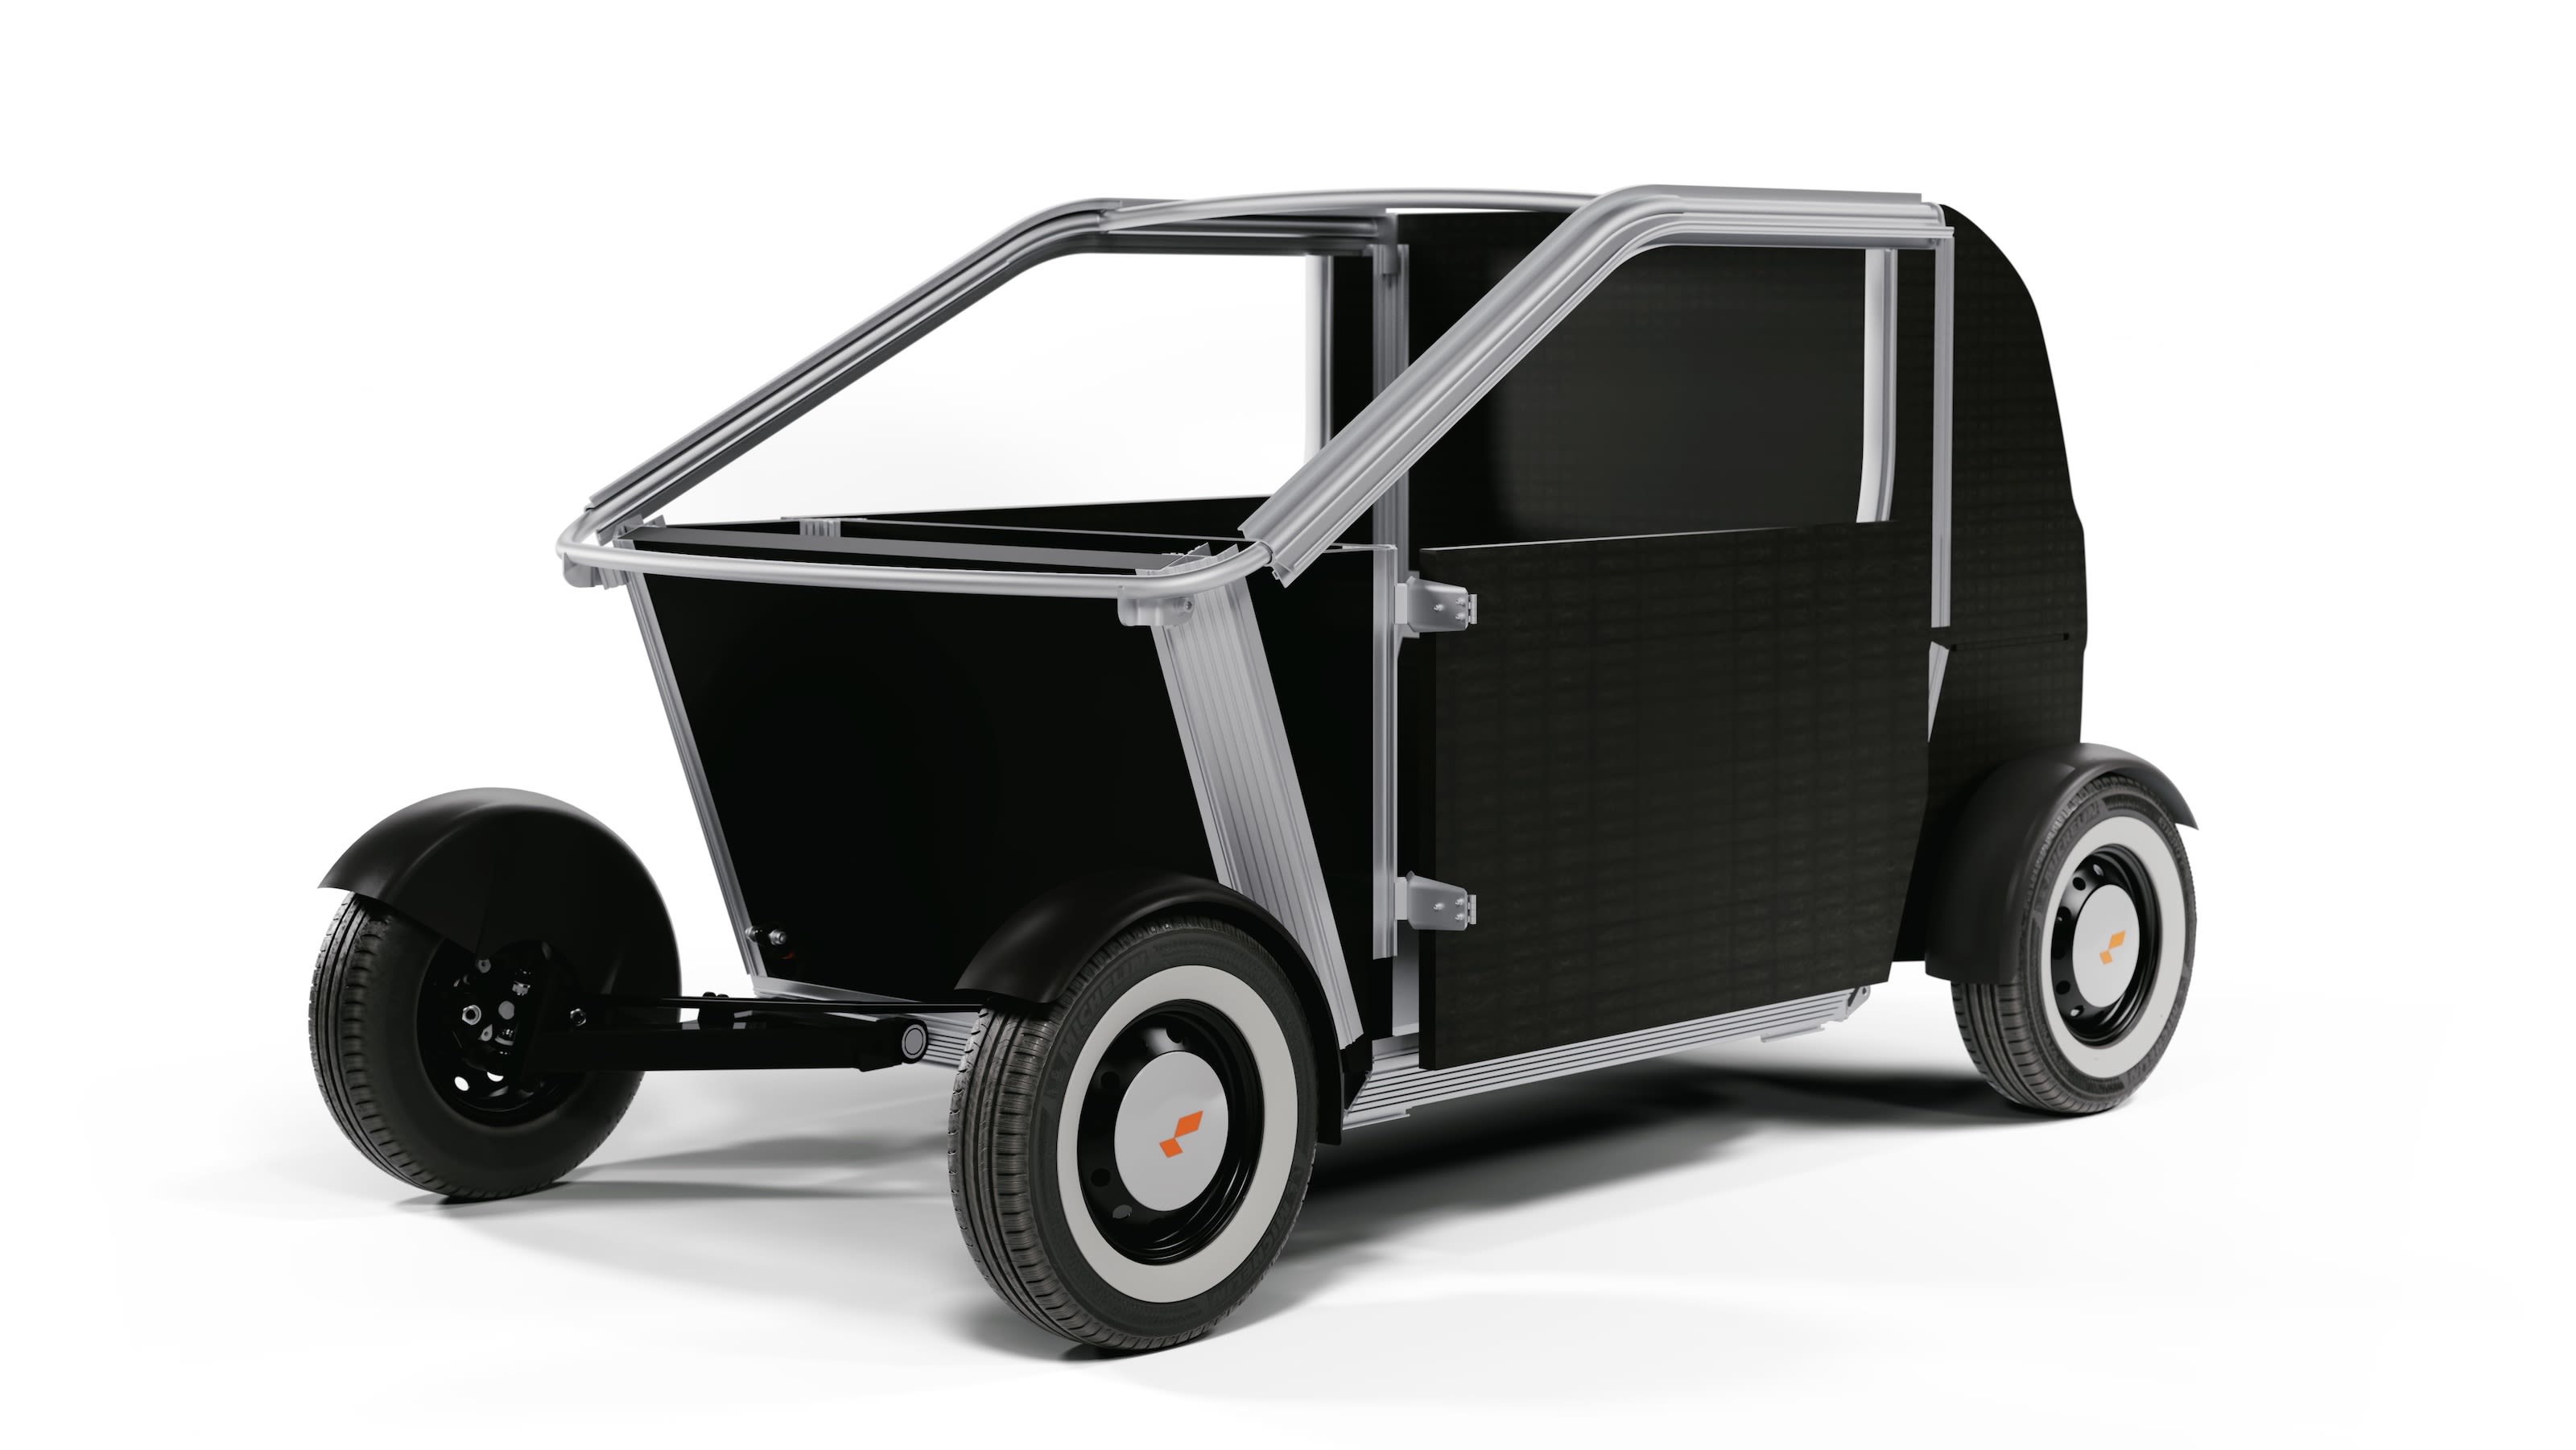 Luvly's patented chassis uses a flat-pack system, allowing more cars to be shipped per container and cutting each vehicle's delivery emissions.